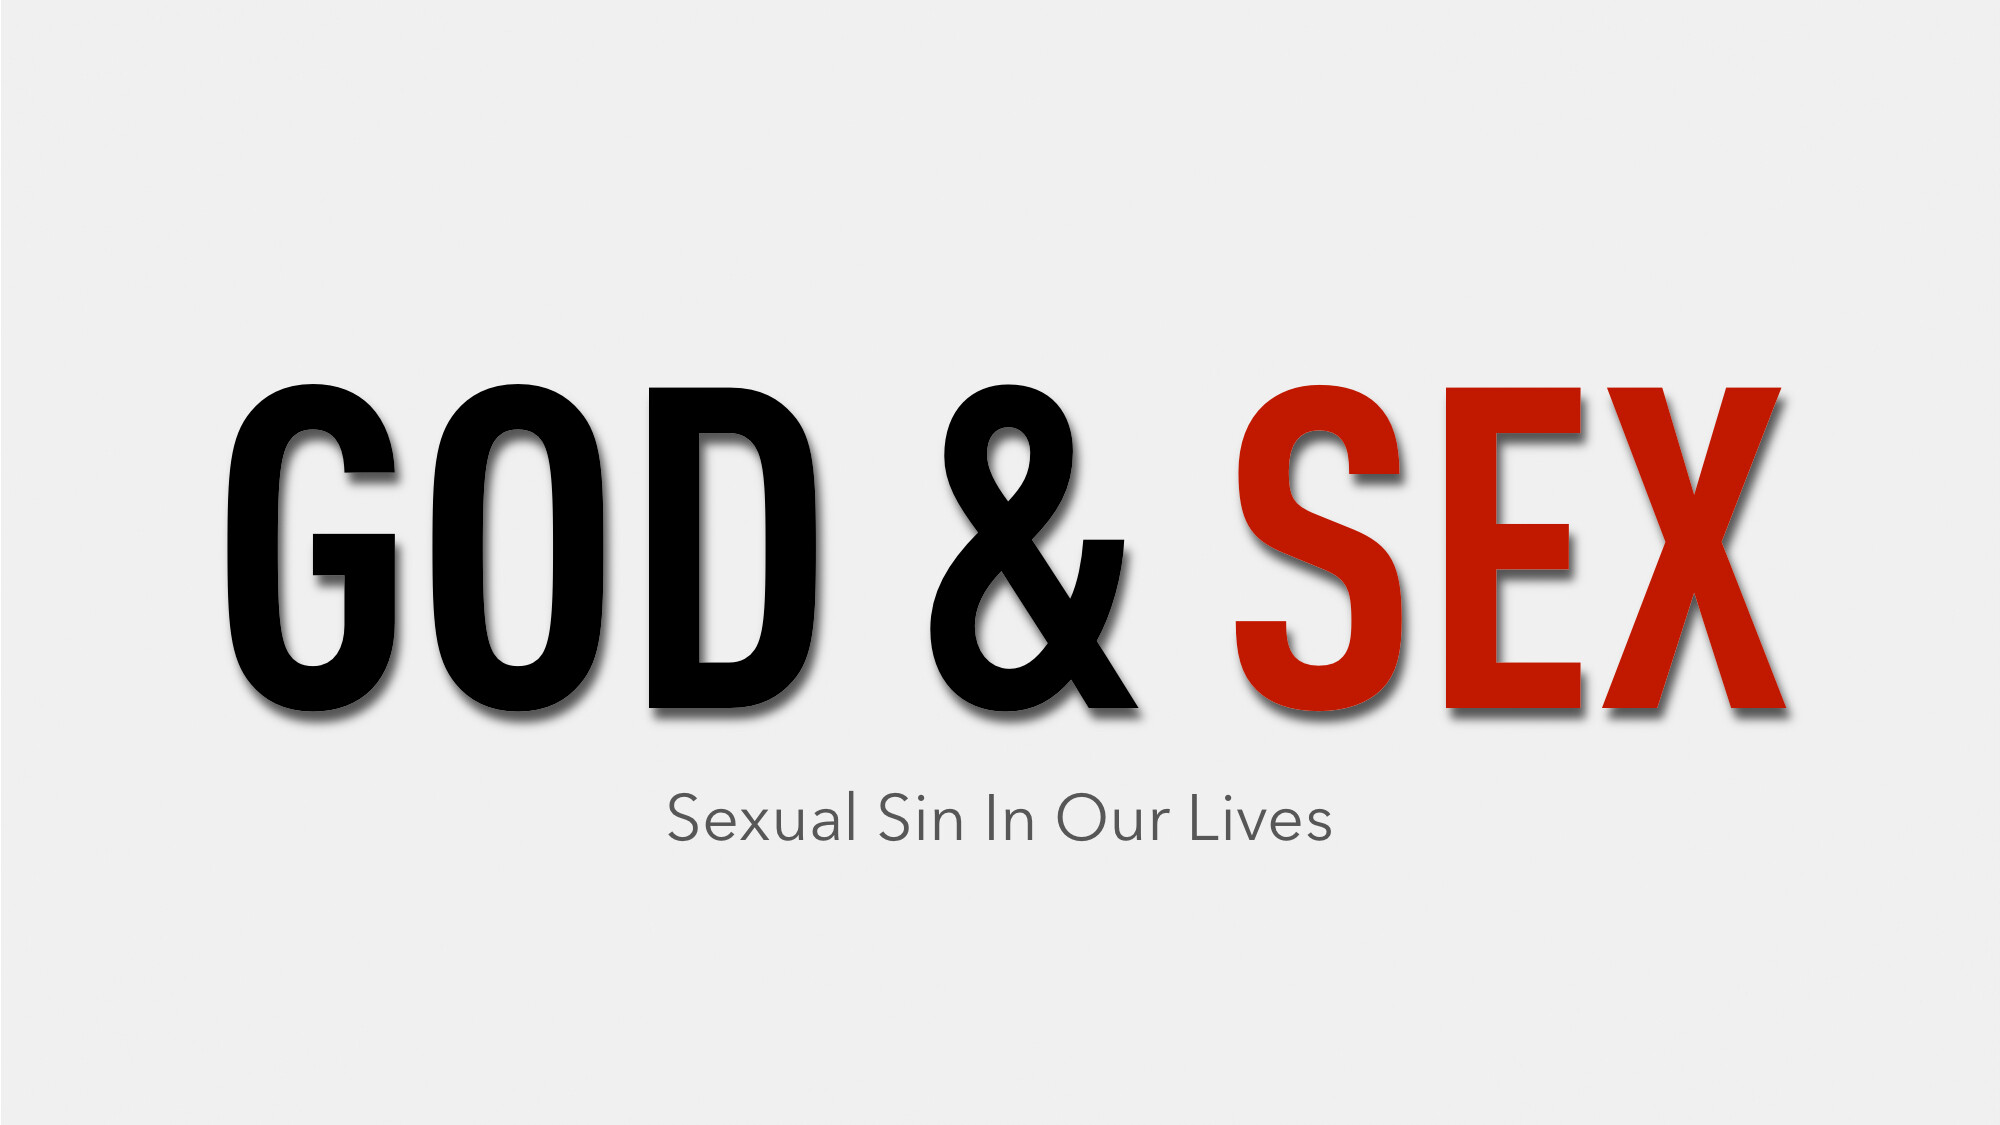 Sexual Sin In Our Lives